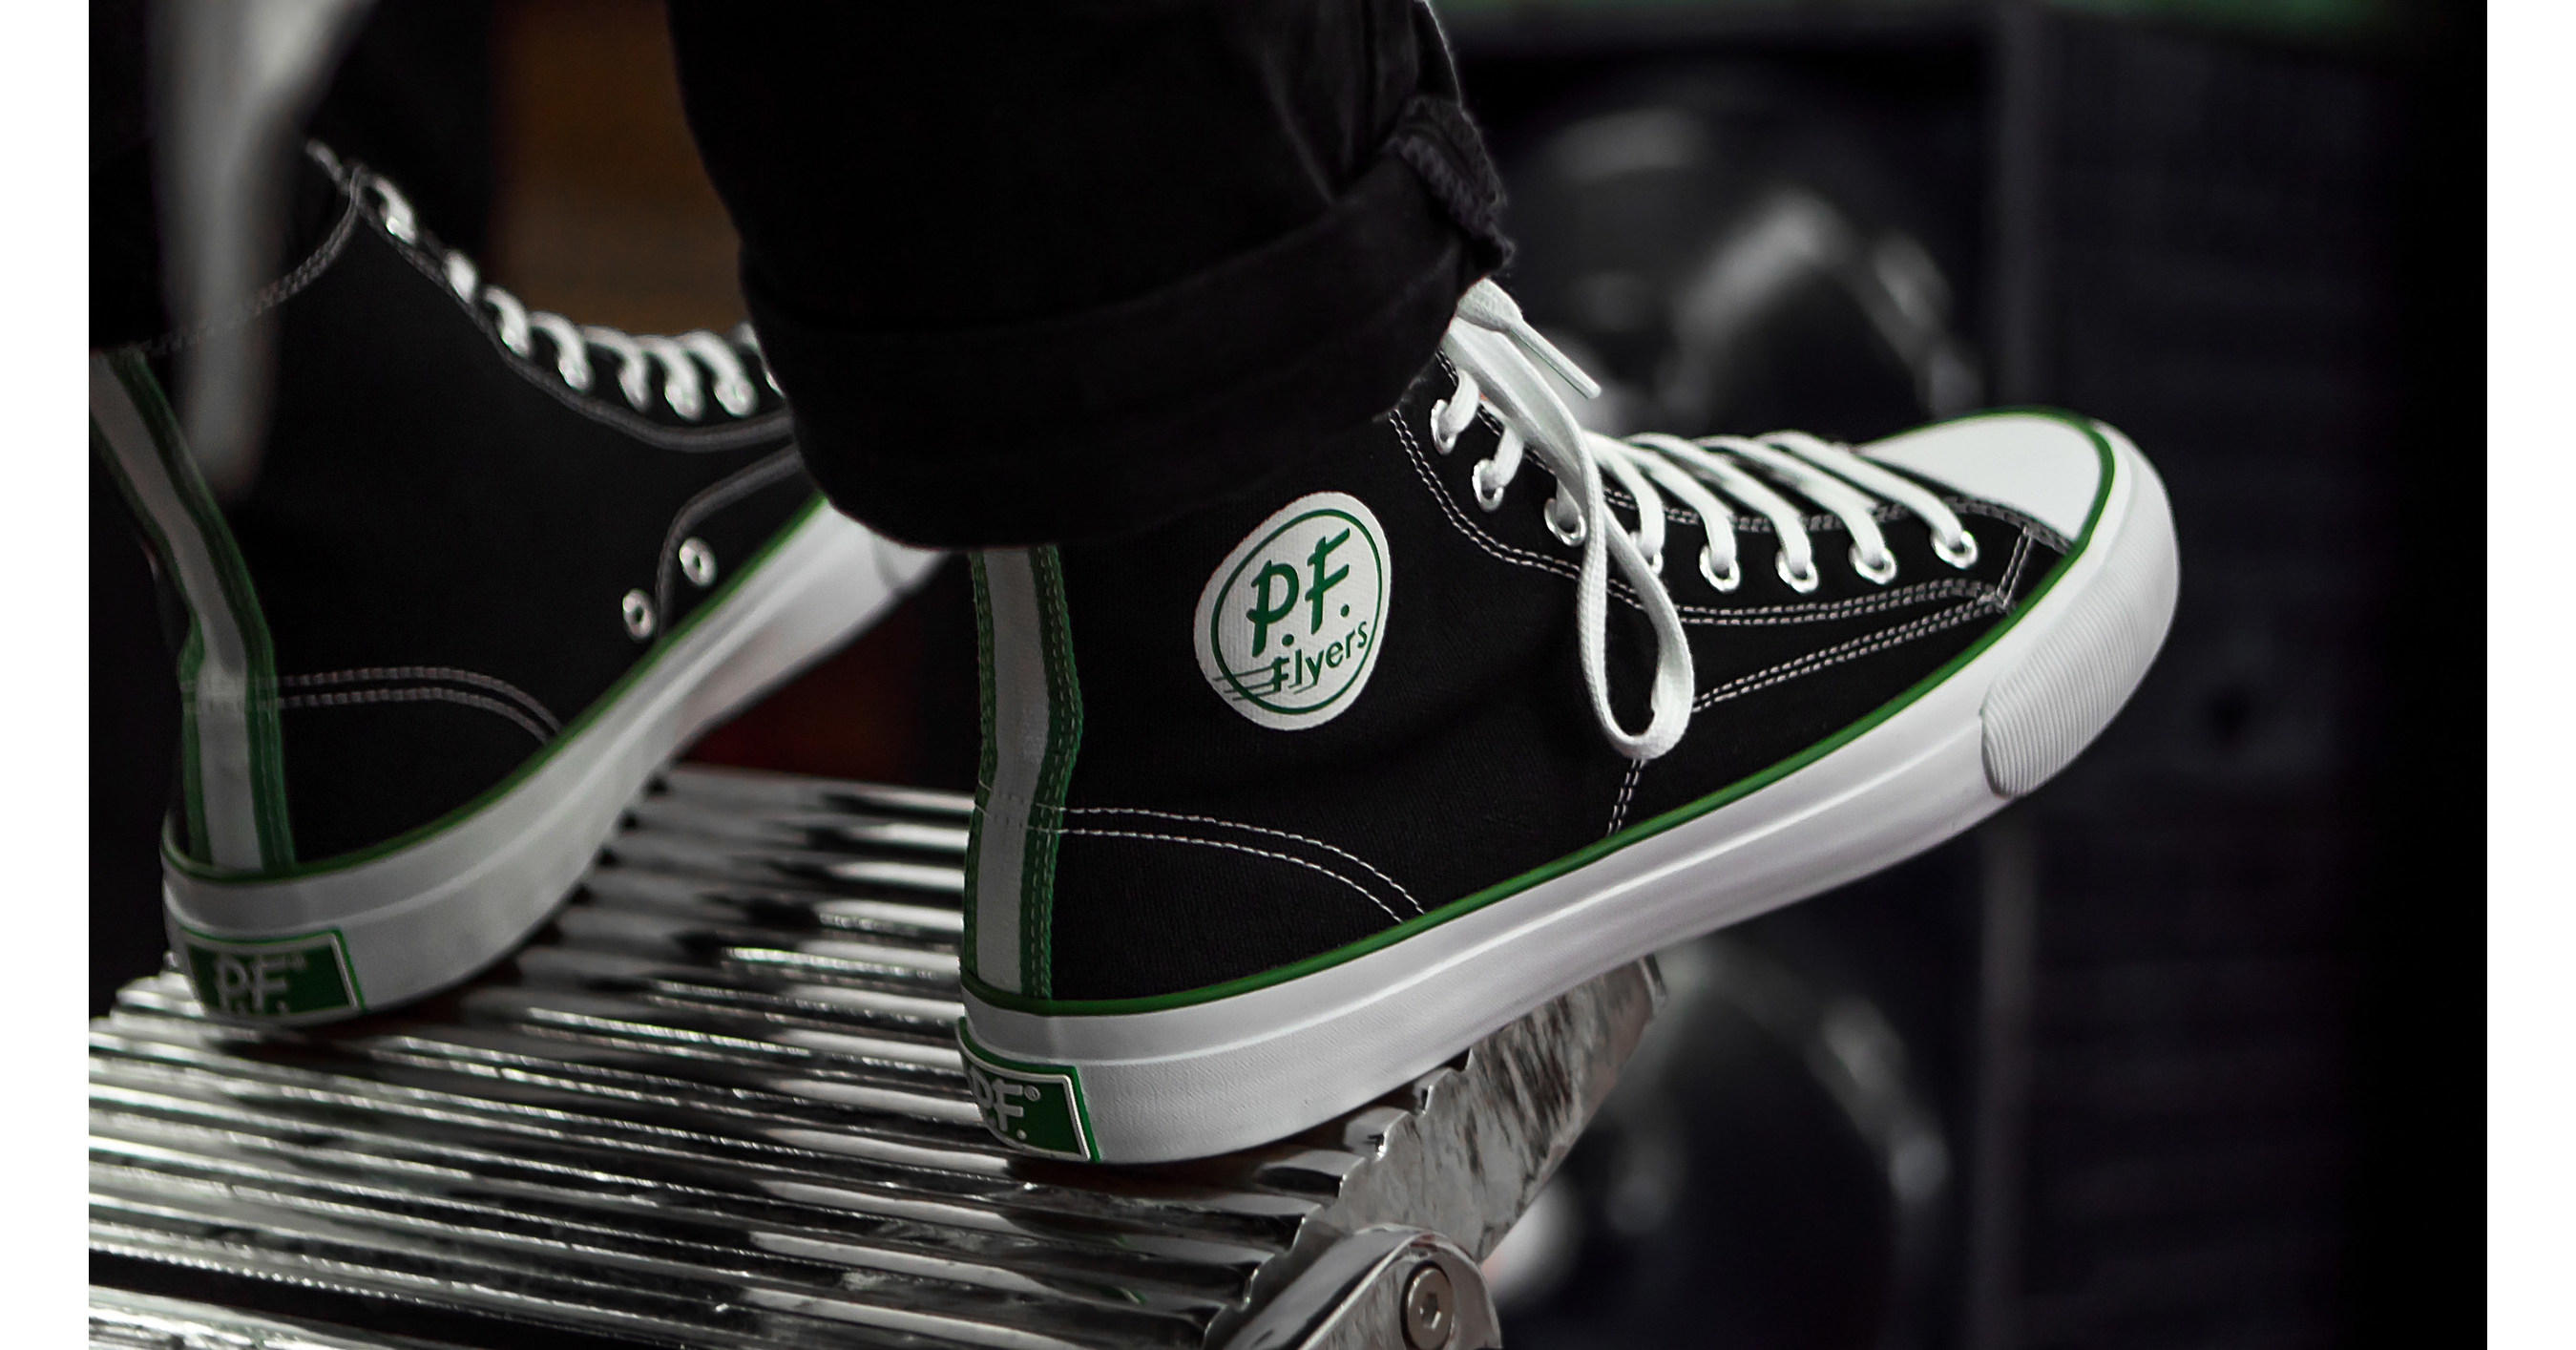 Introducing The PF Flyers All American